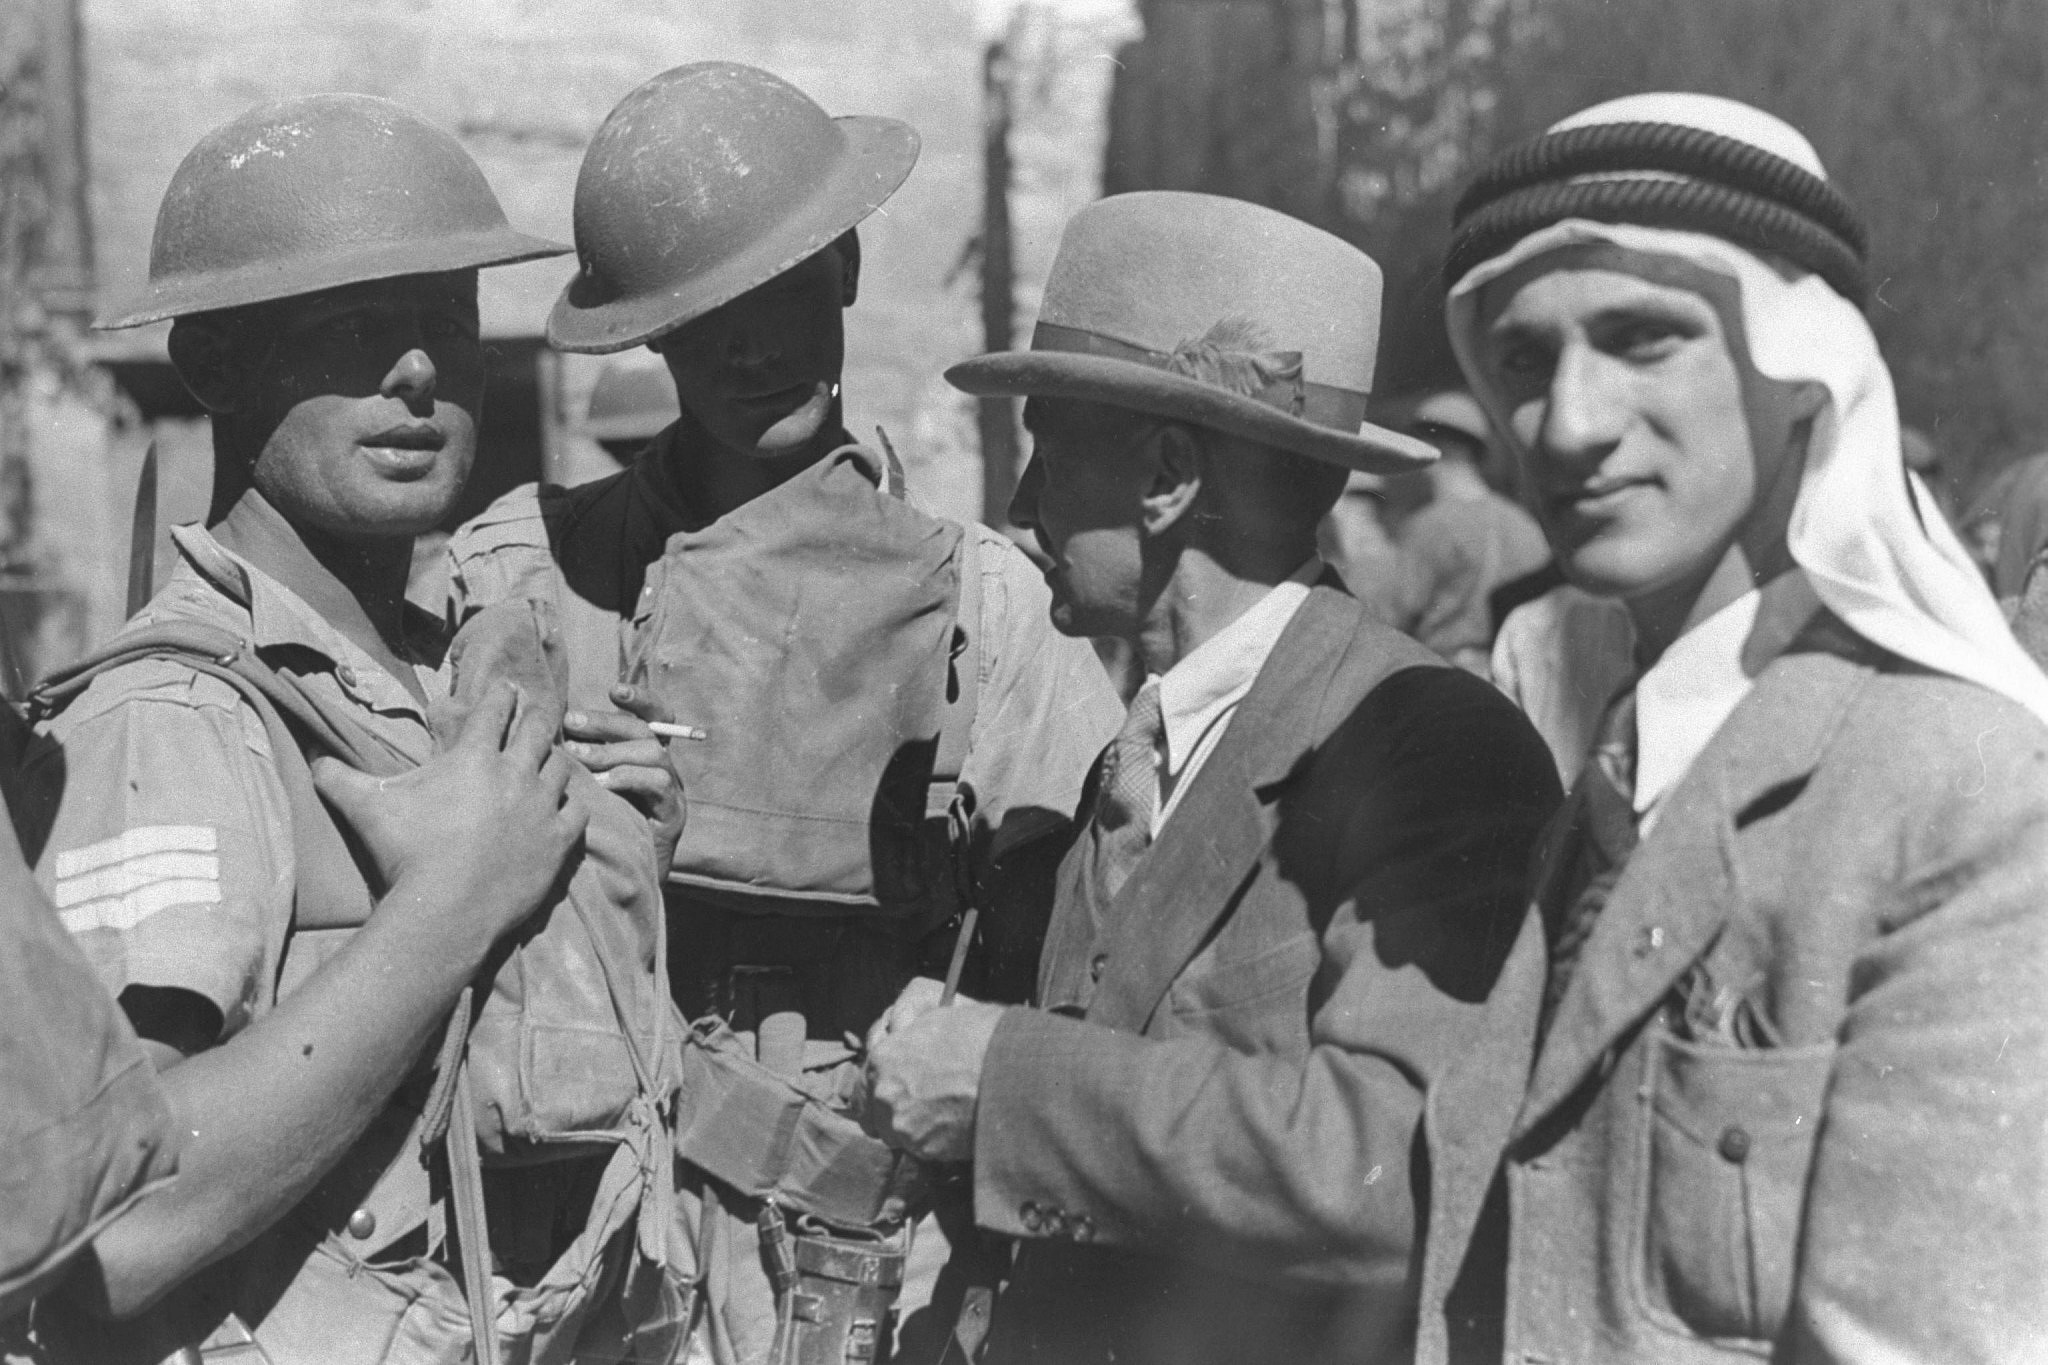 British soldiers in the Old City of Jerusalem encounter local residents, October 30, 1938. (American Colony/GPO)